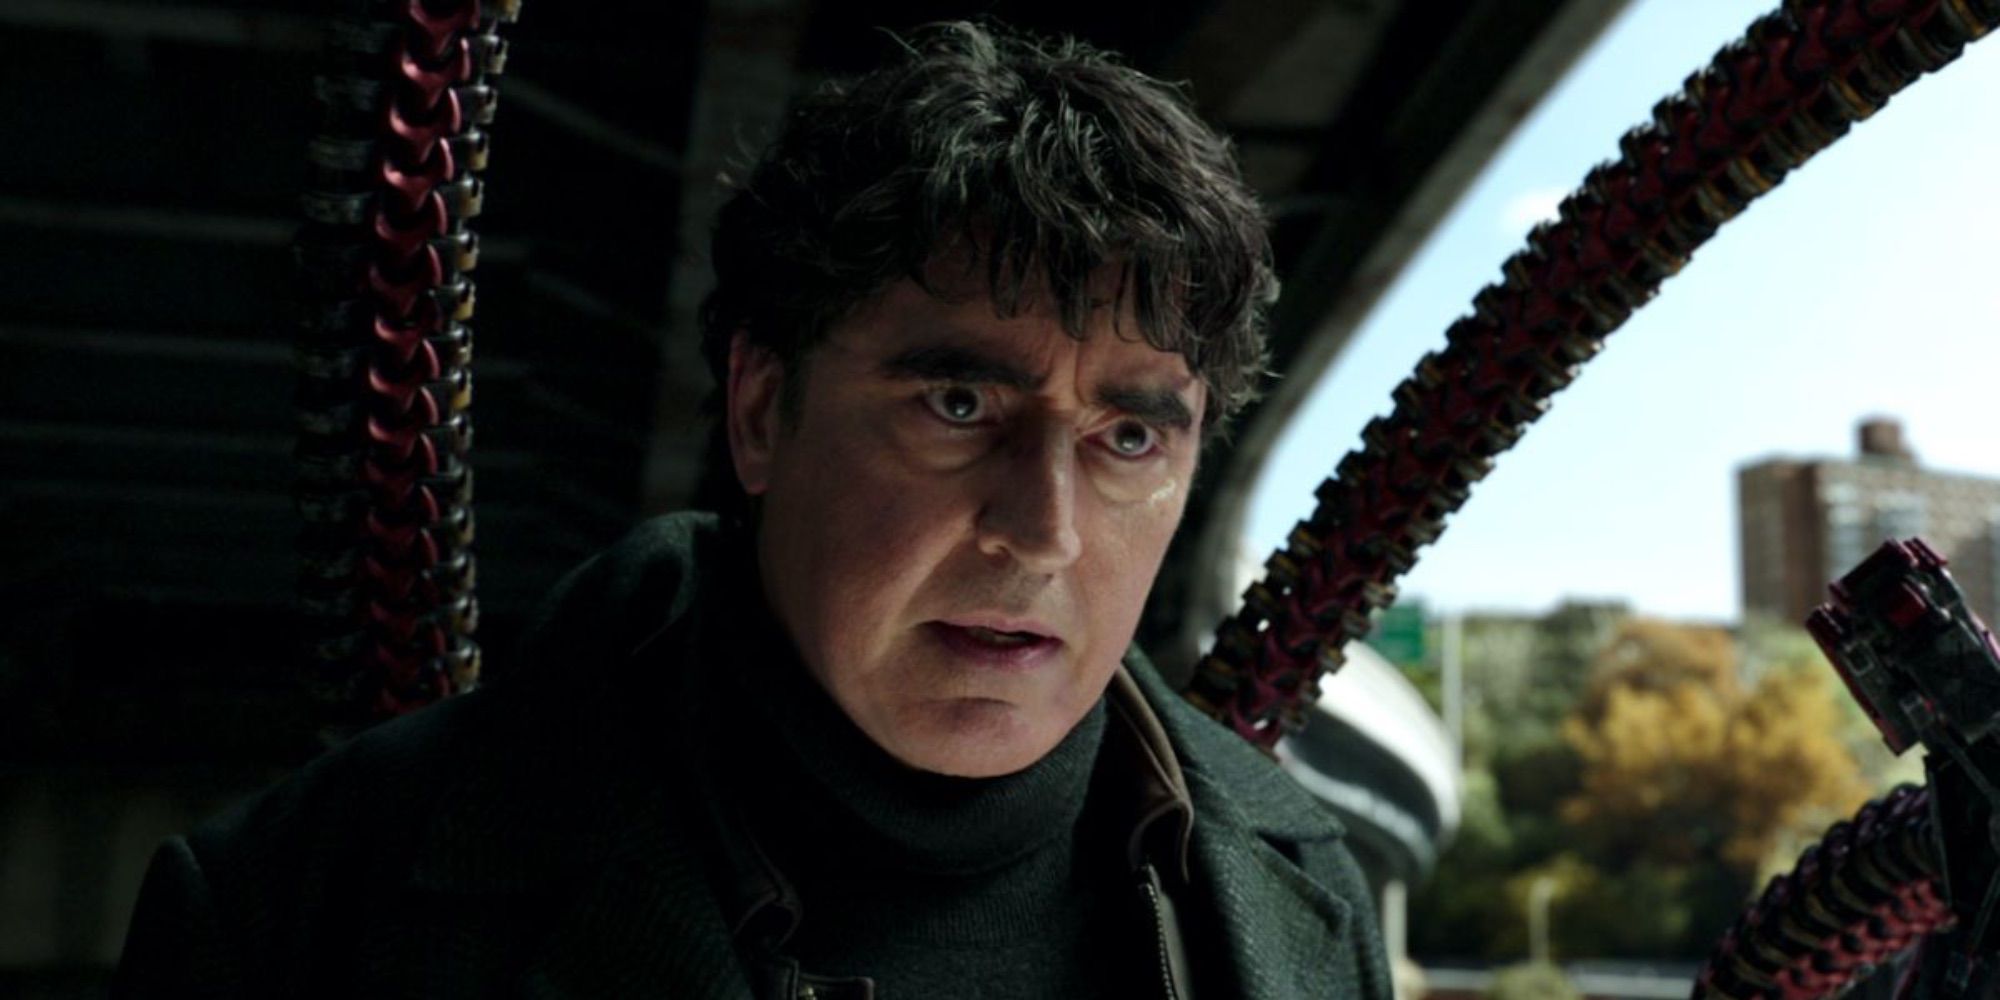 Alfred Molina as Otto Octavius in Spider-man: No Way Home